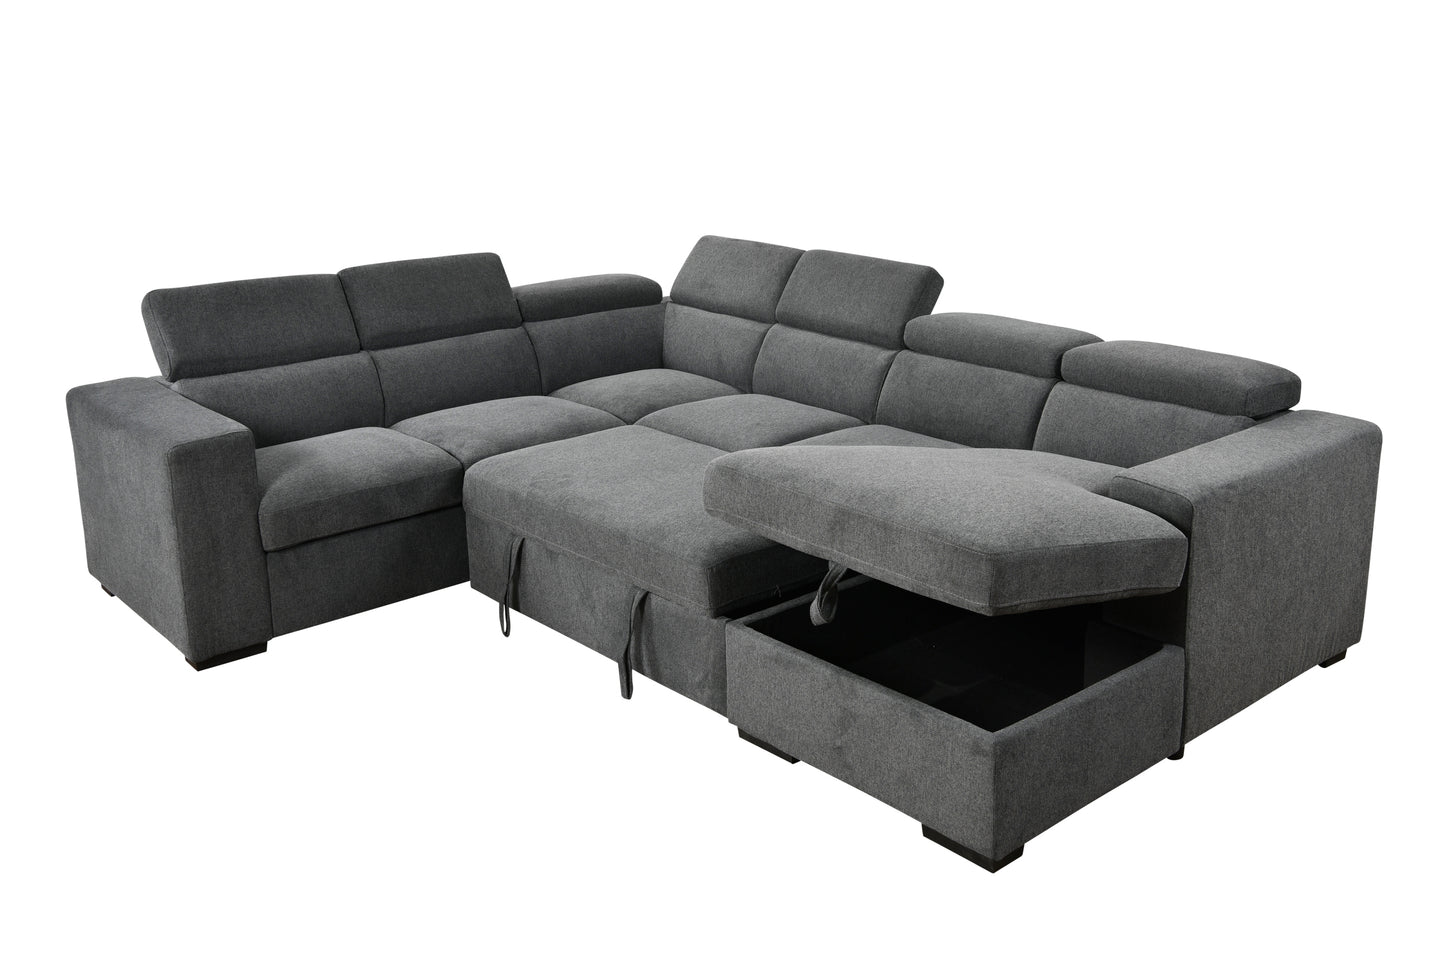 4 in 1 Modern U-Shaped 7-seat Sectional Sofa Couch with Adjustable Headrest, Sofa Bed with Storage Chaise,Pull Out Couch Bed for Living Room ,Dark Gray